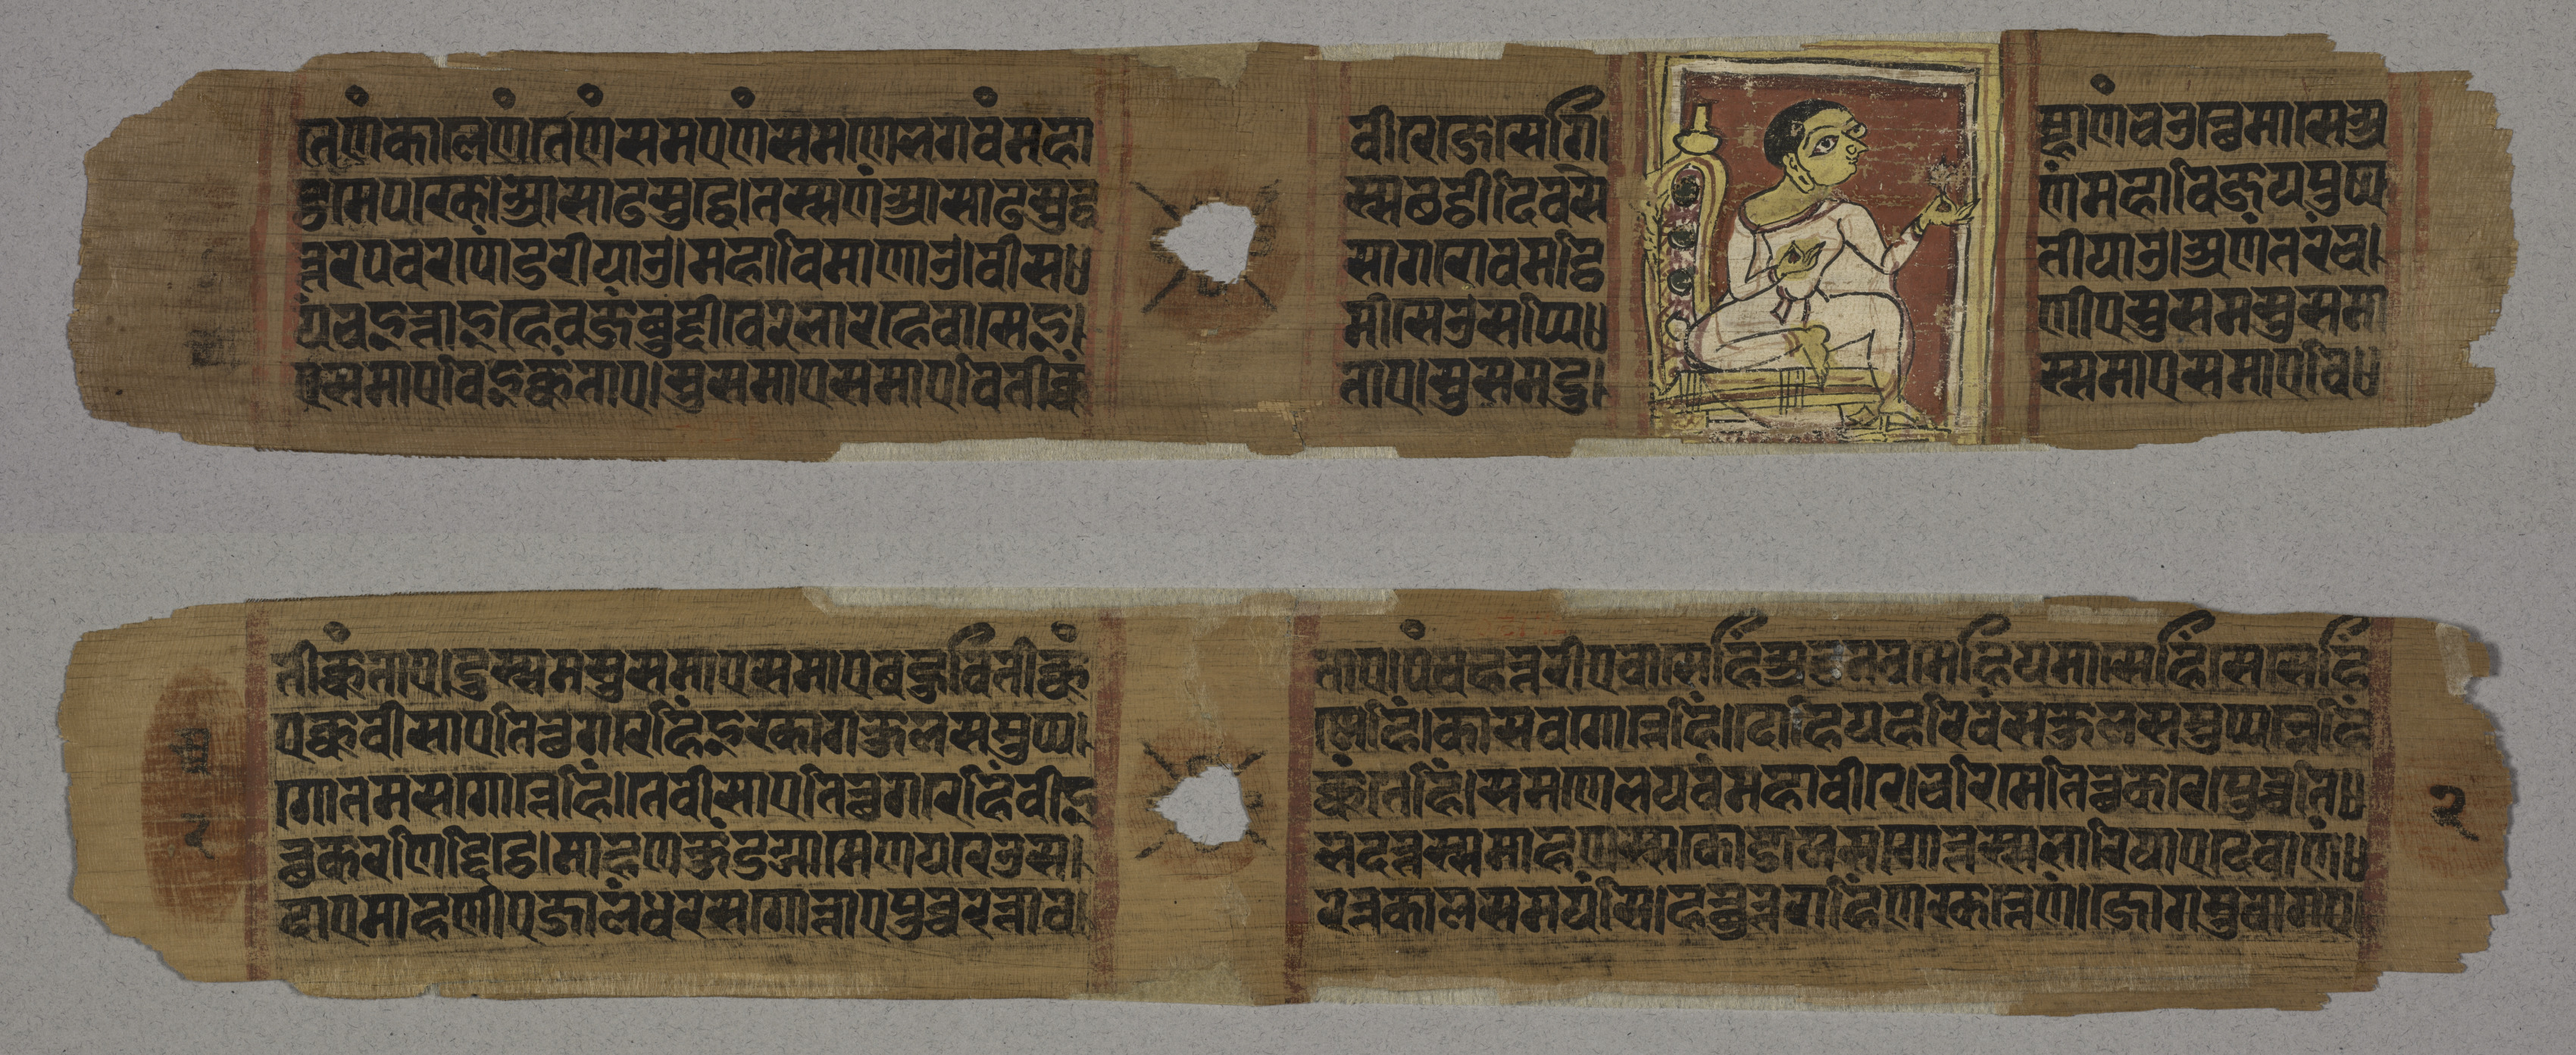 Folio 2, from a Kalpa-sutra and Story of Kalakacharya: Monk Holding a Flower (recto); text (verso)